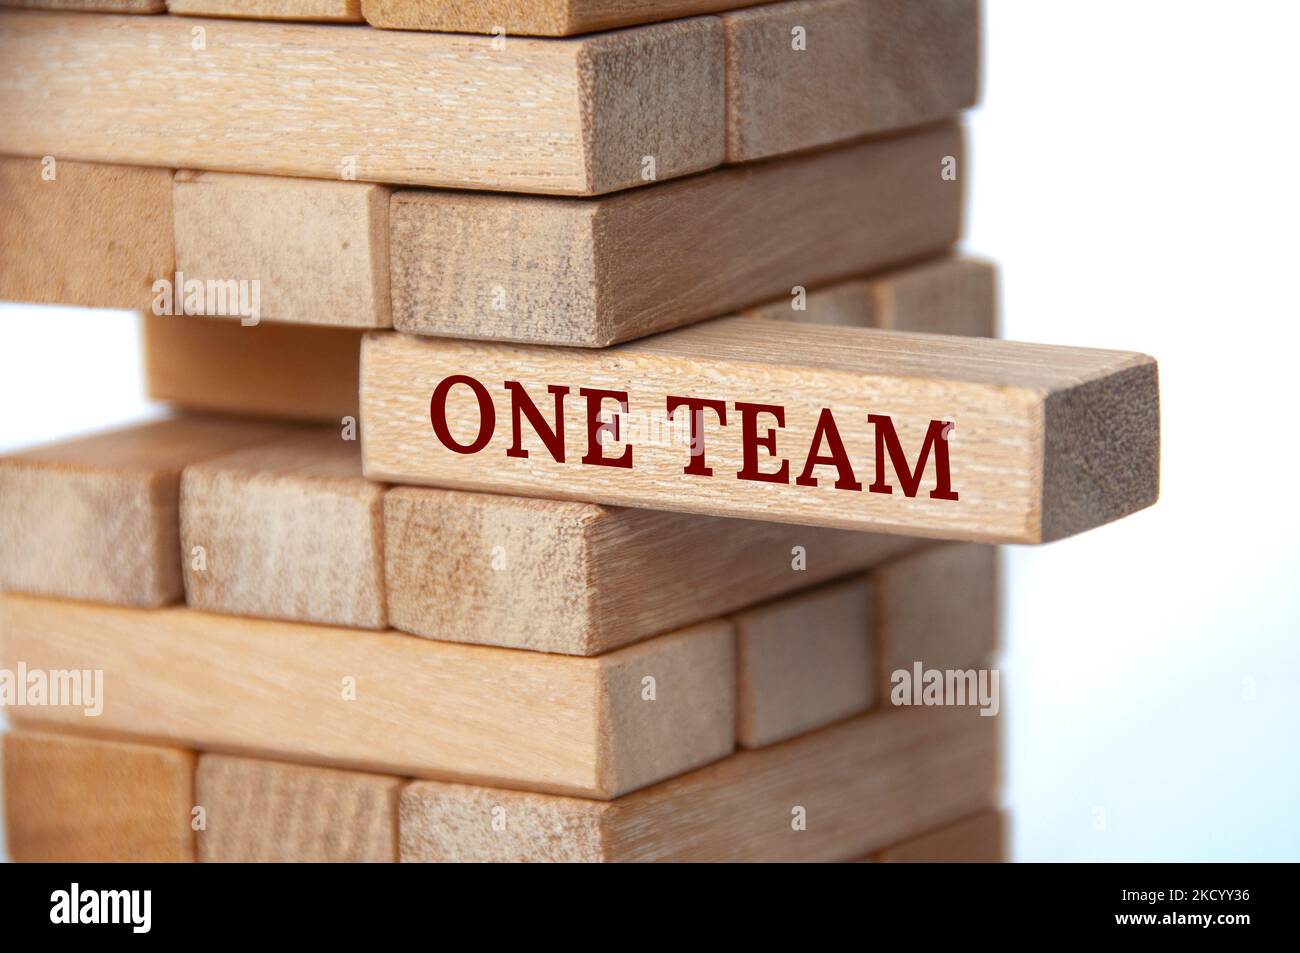 One Team text on wooden blocks. Team work concept. Stock Photo